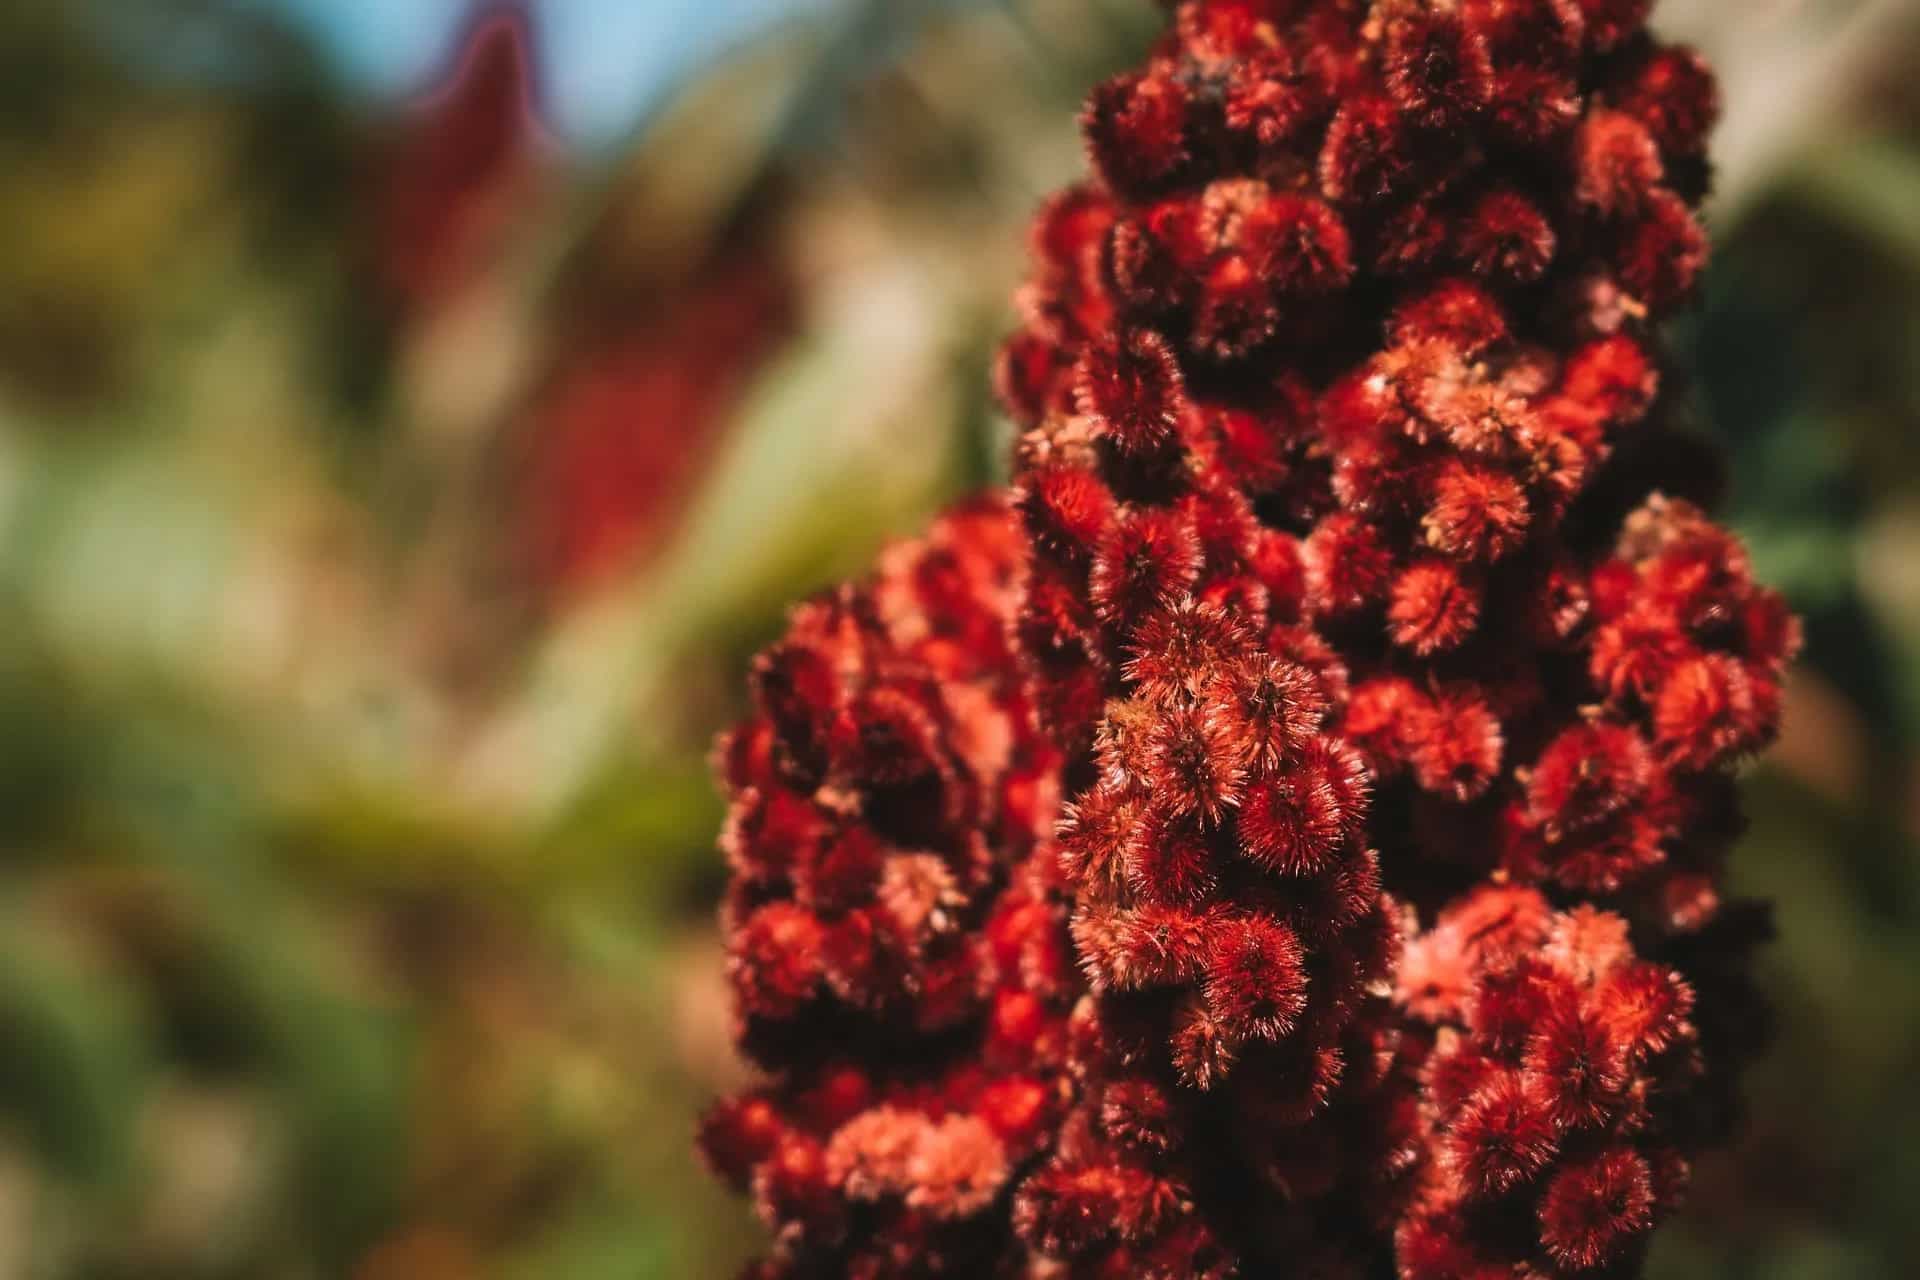 Sumac: The Underrated Middle Eastern Spice